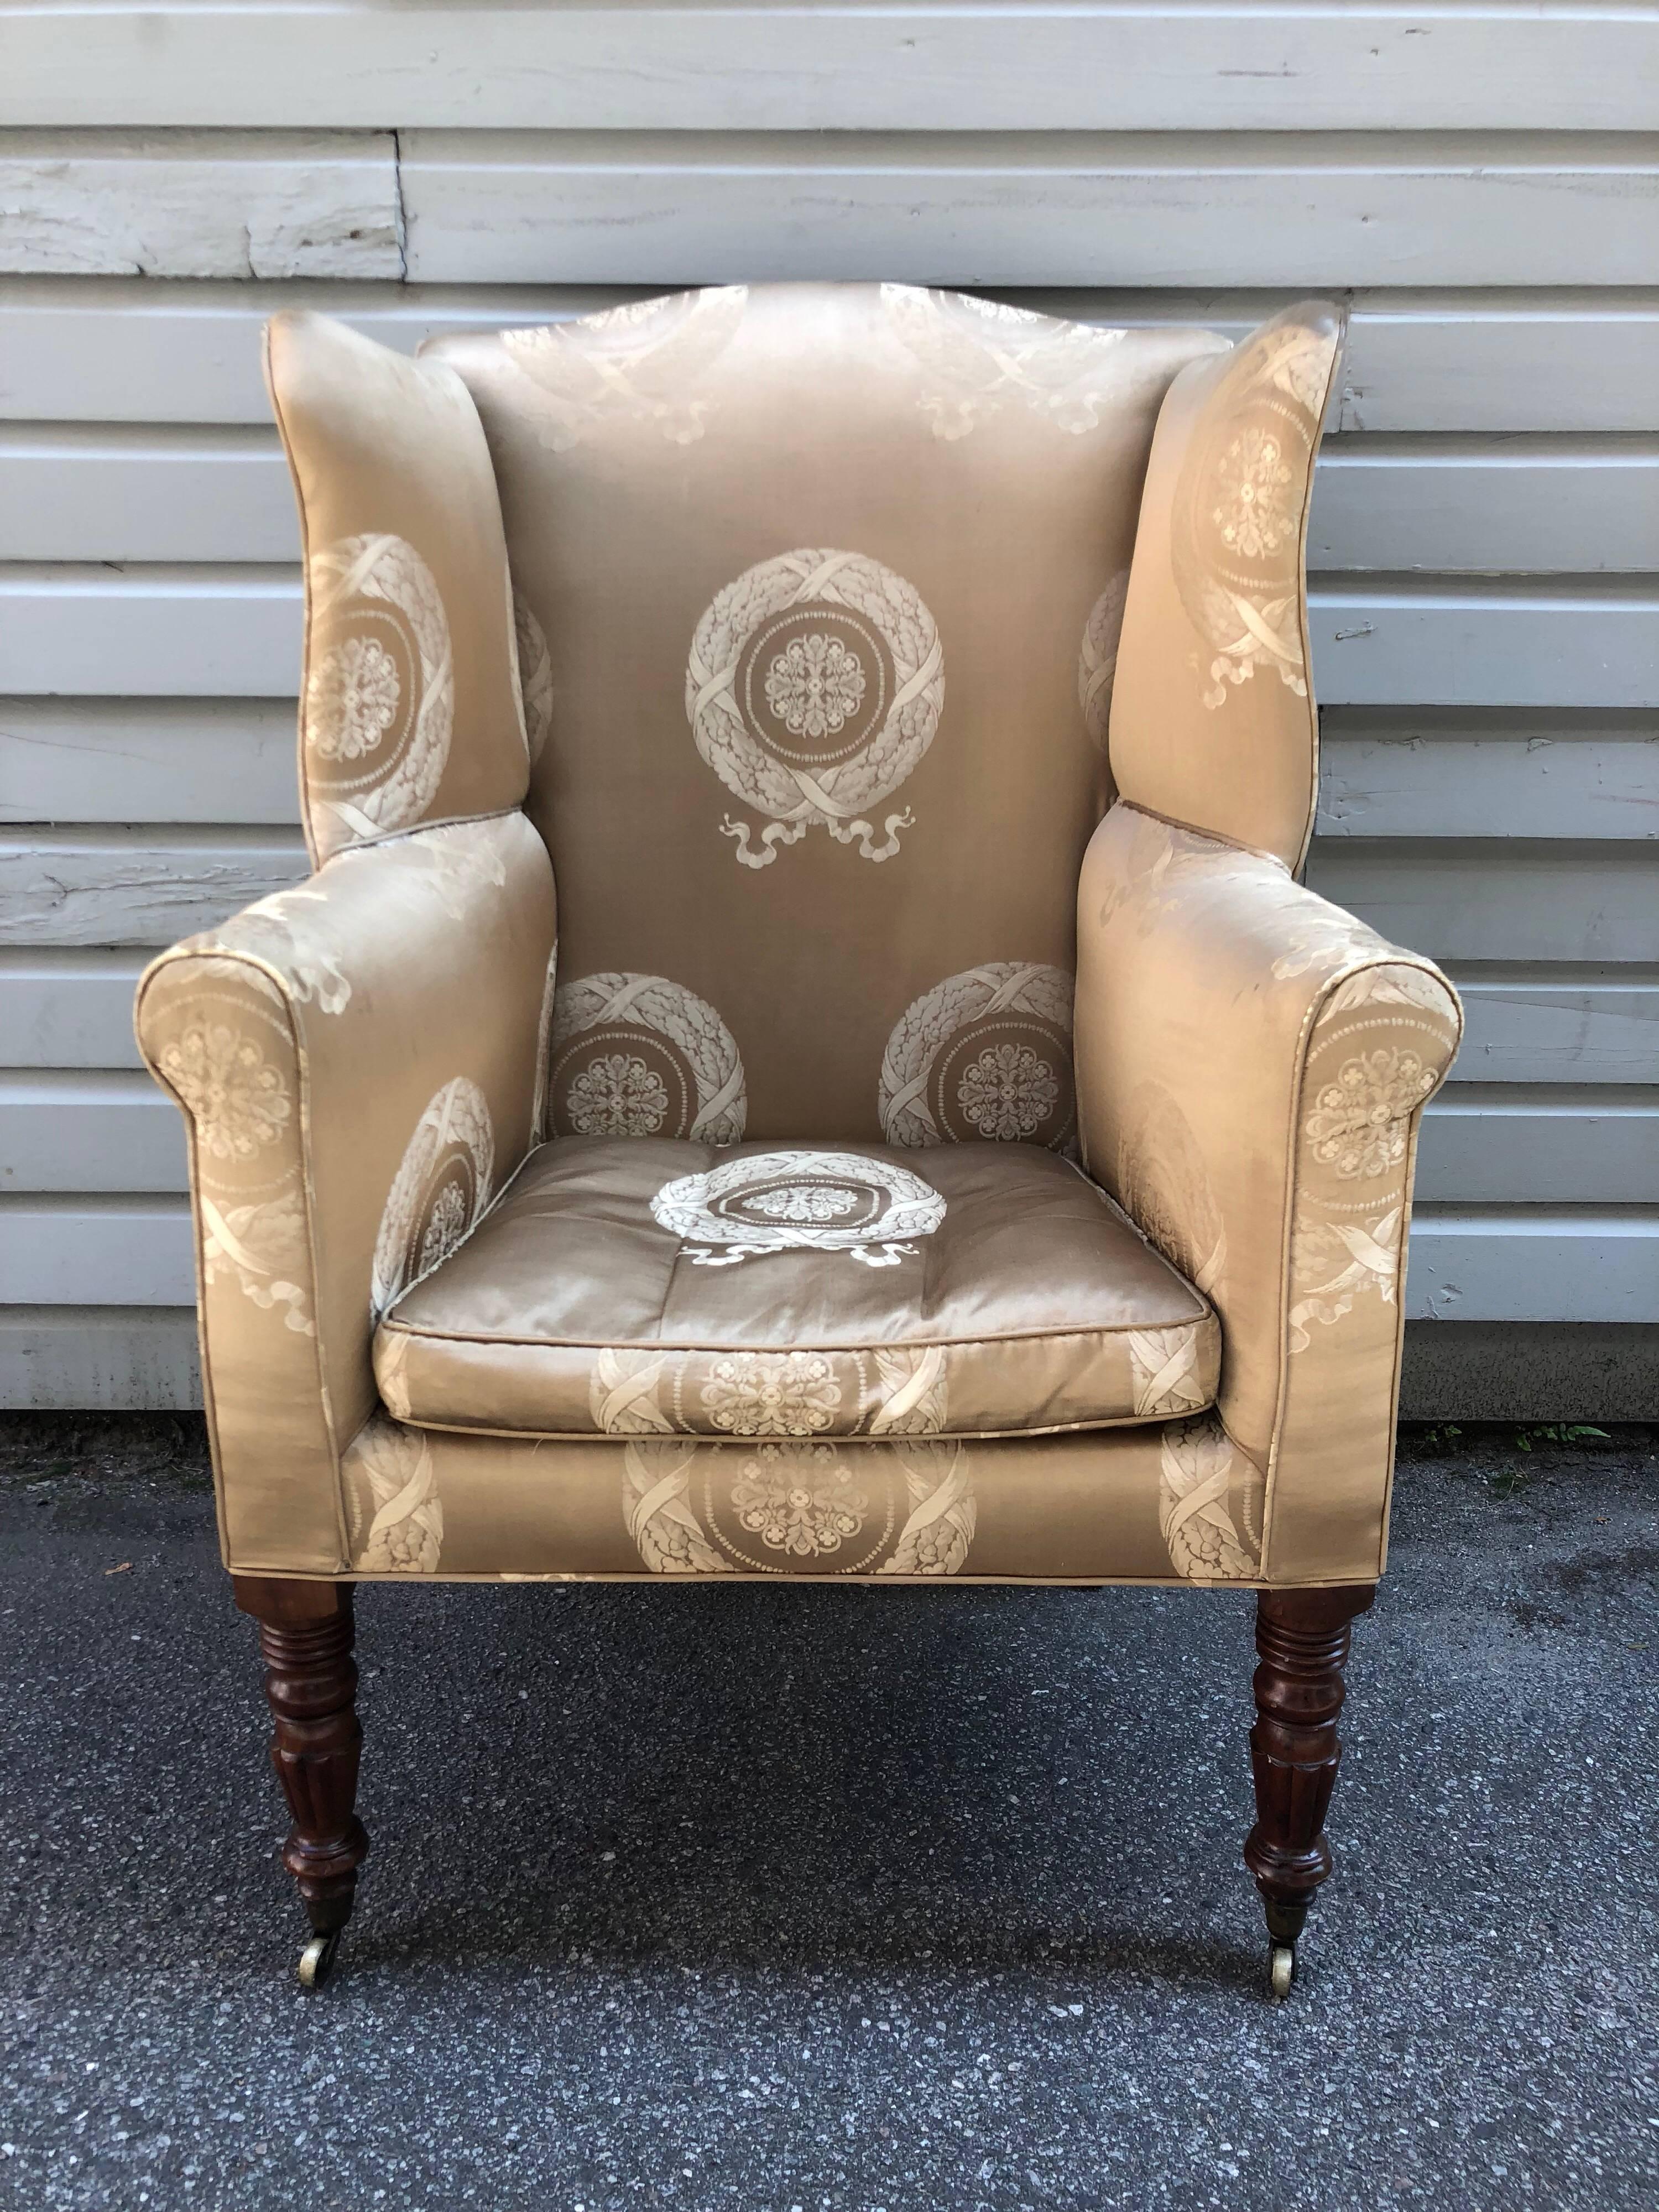 American wingback chair, attributed to Baltimore, mahogany turned and reeded legs, original casters, 1800-1815.